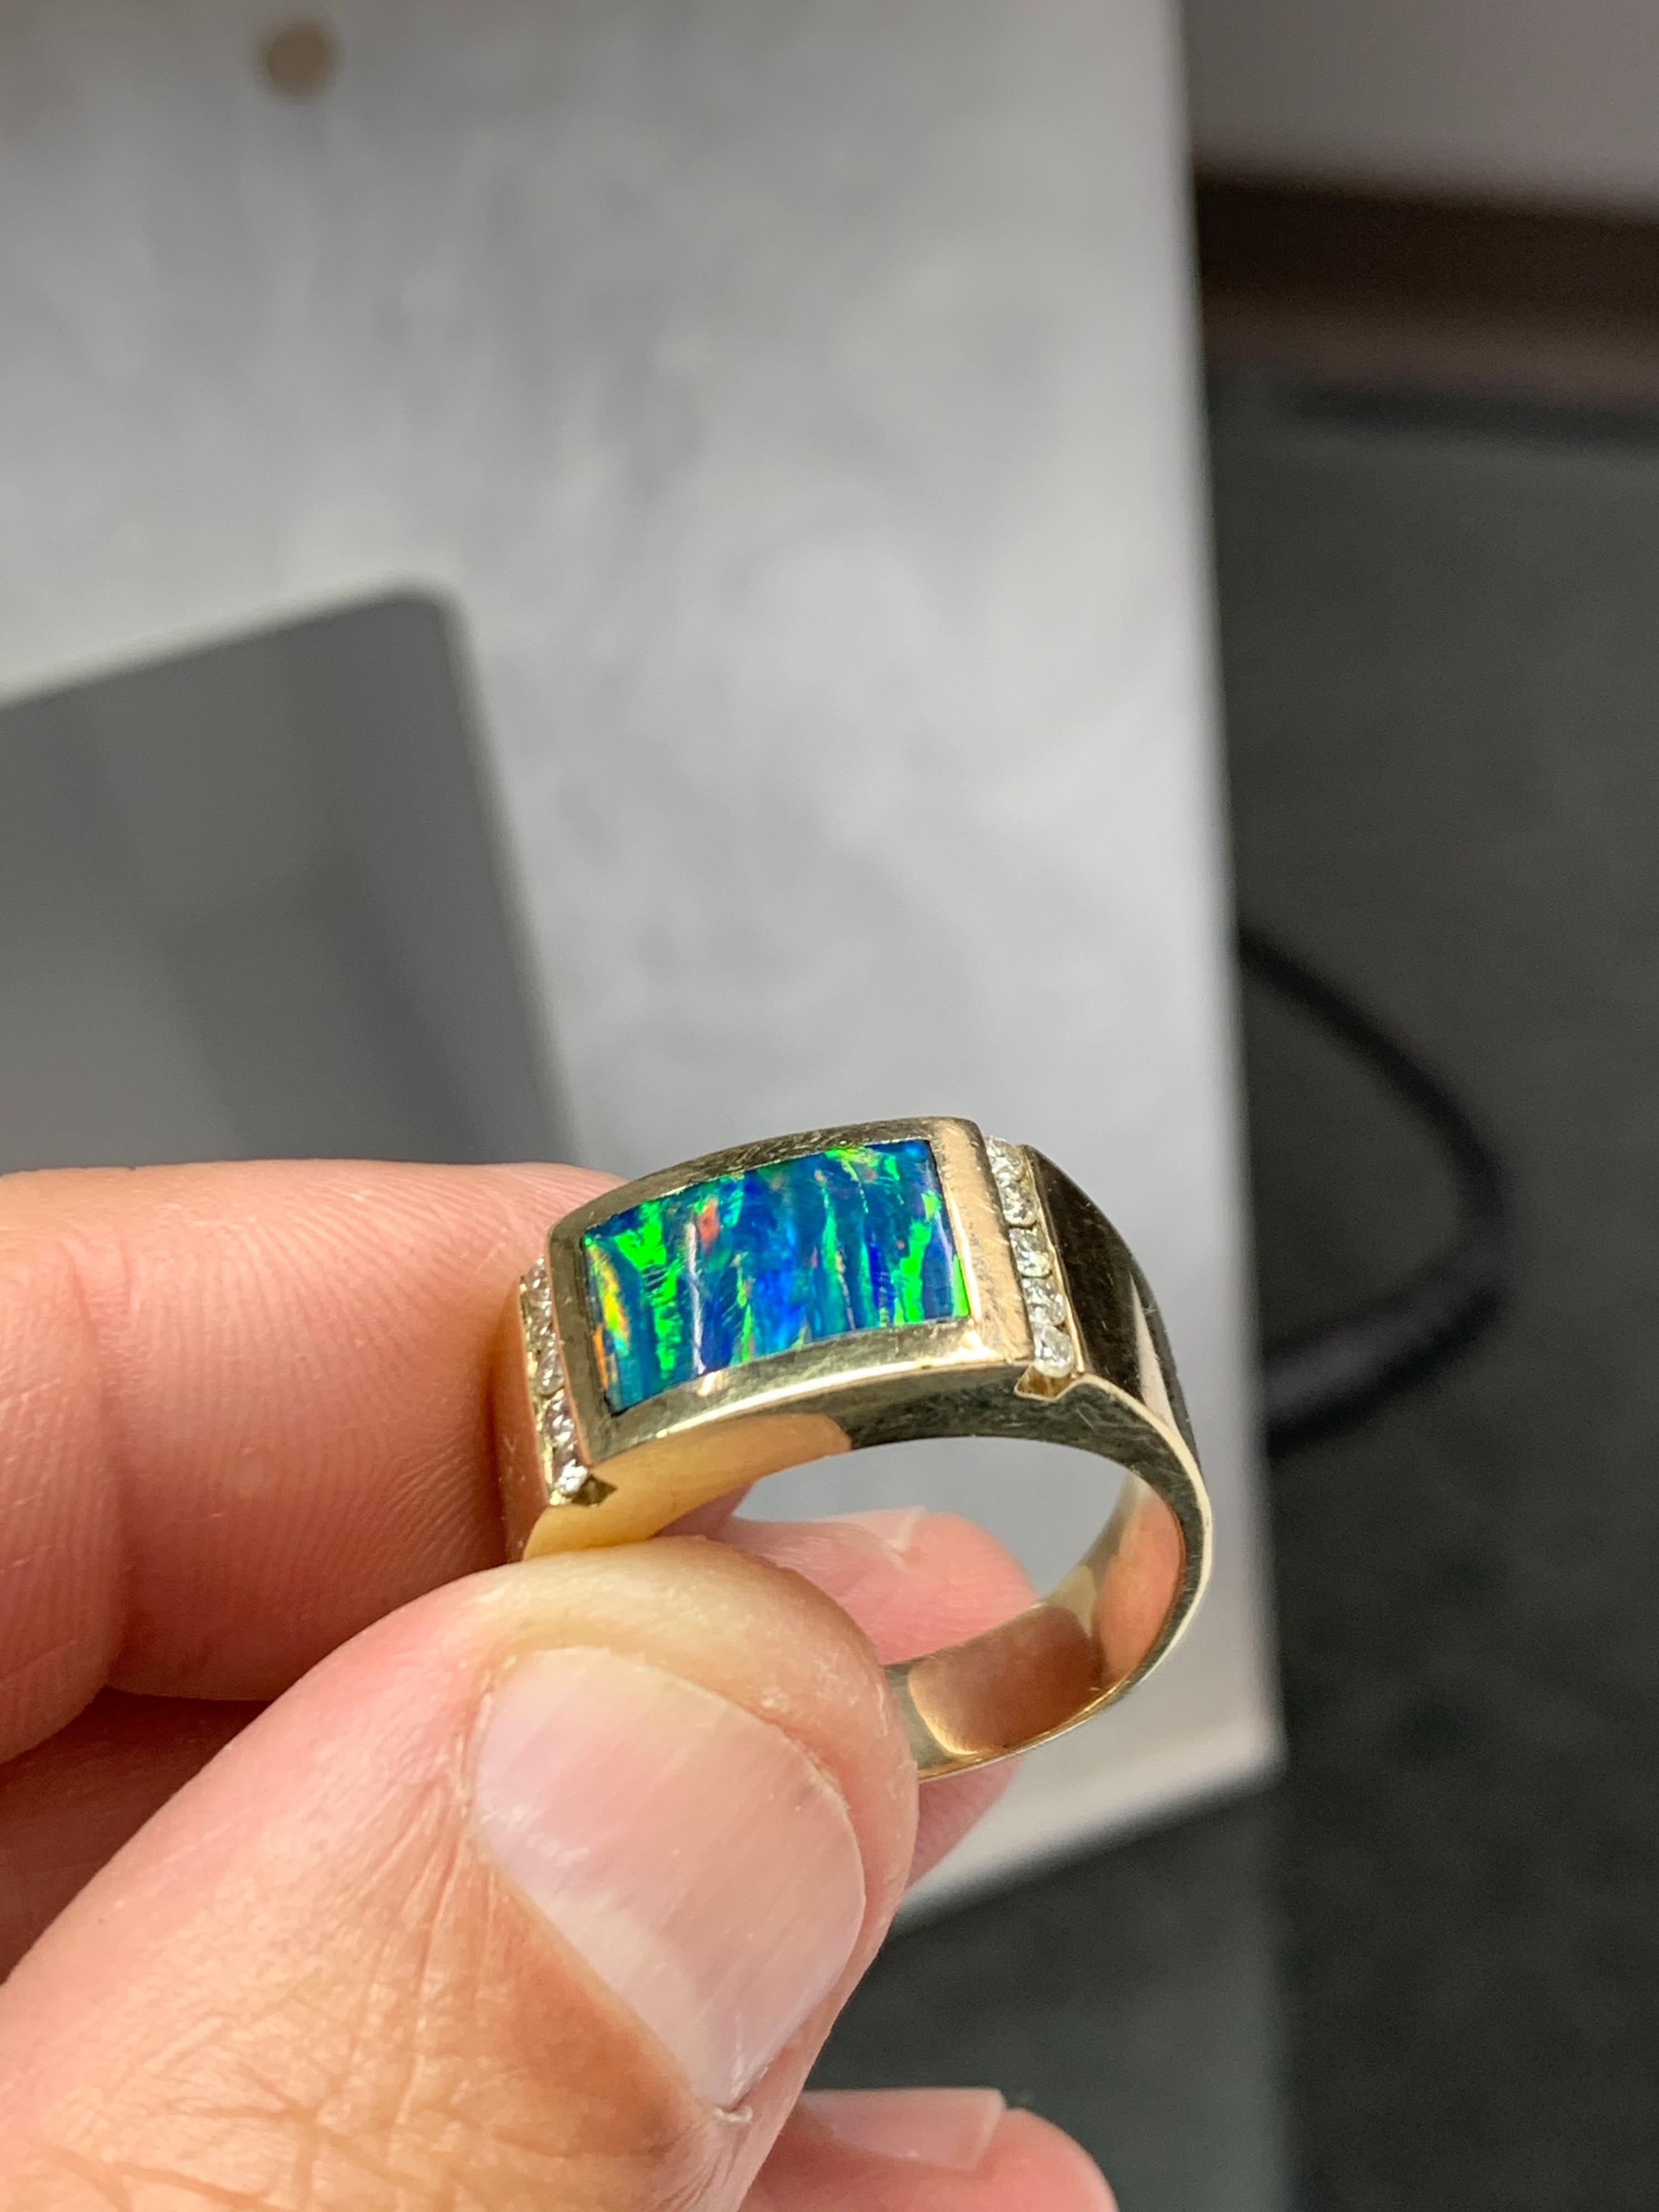 Retro Men’s 14k Yellow Gold Ring , Size 12.

Natural Opal Doublet Gem Stone (12x8mm) & ten 0.30 Carat (H SI) Natural Diamonds, Circa 1970. 

Weight of the ring is 11.57 grams.

Shipped with USPS First Class Package.